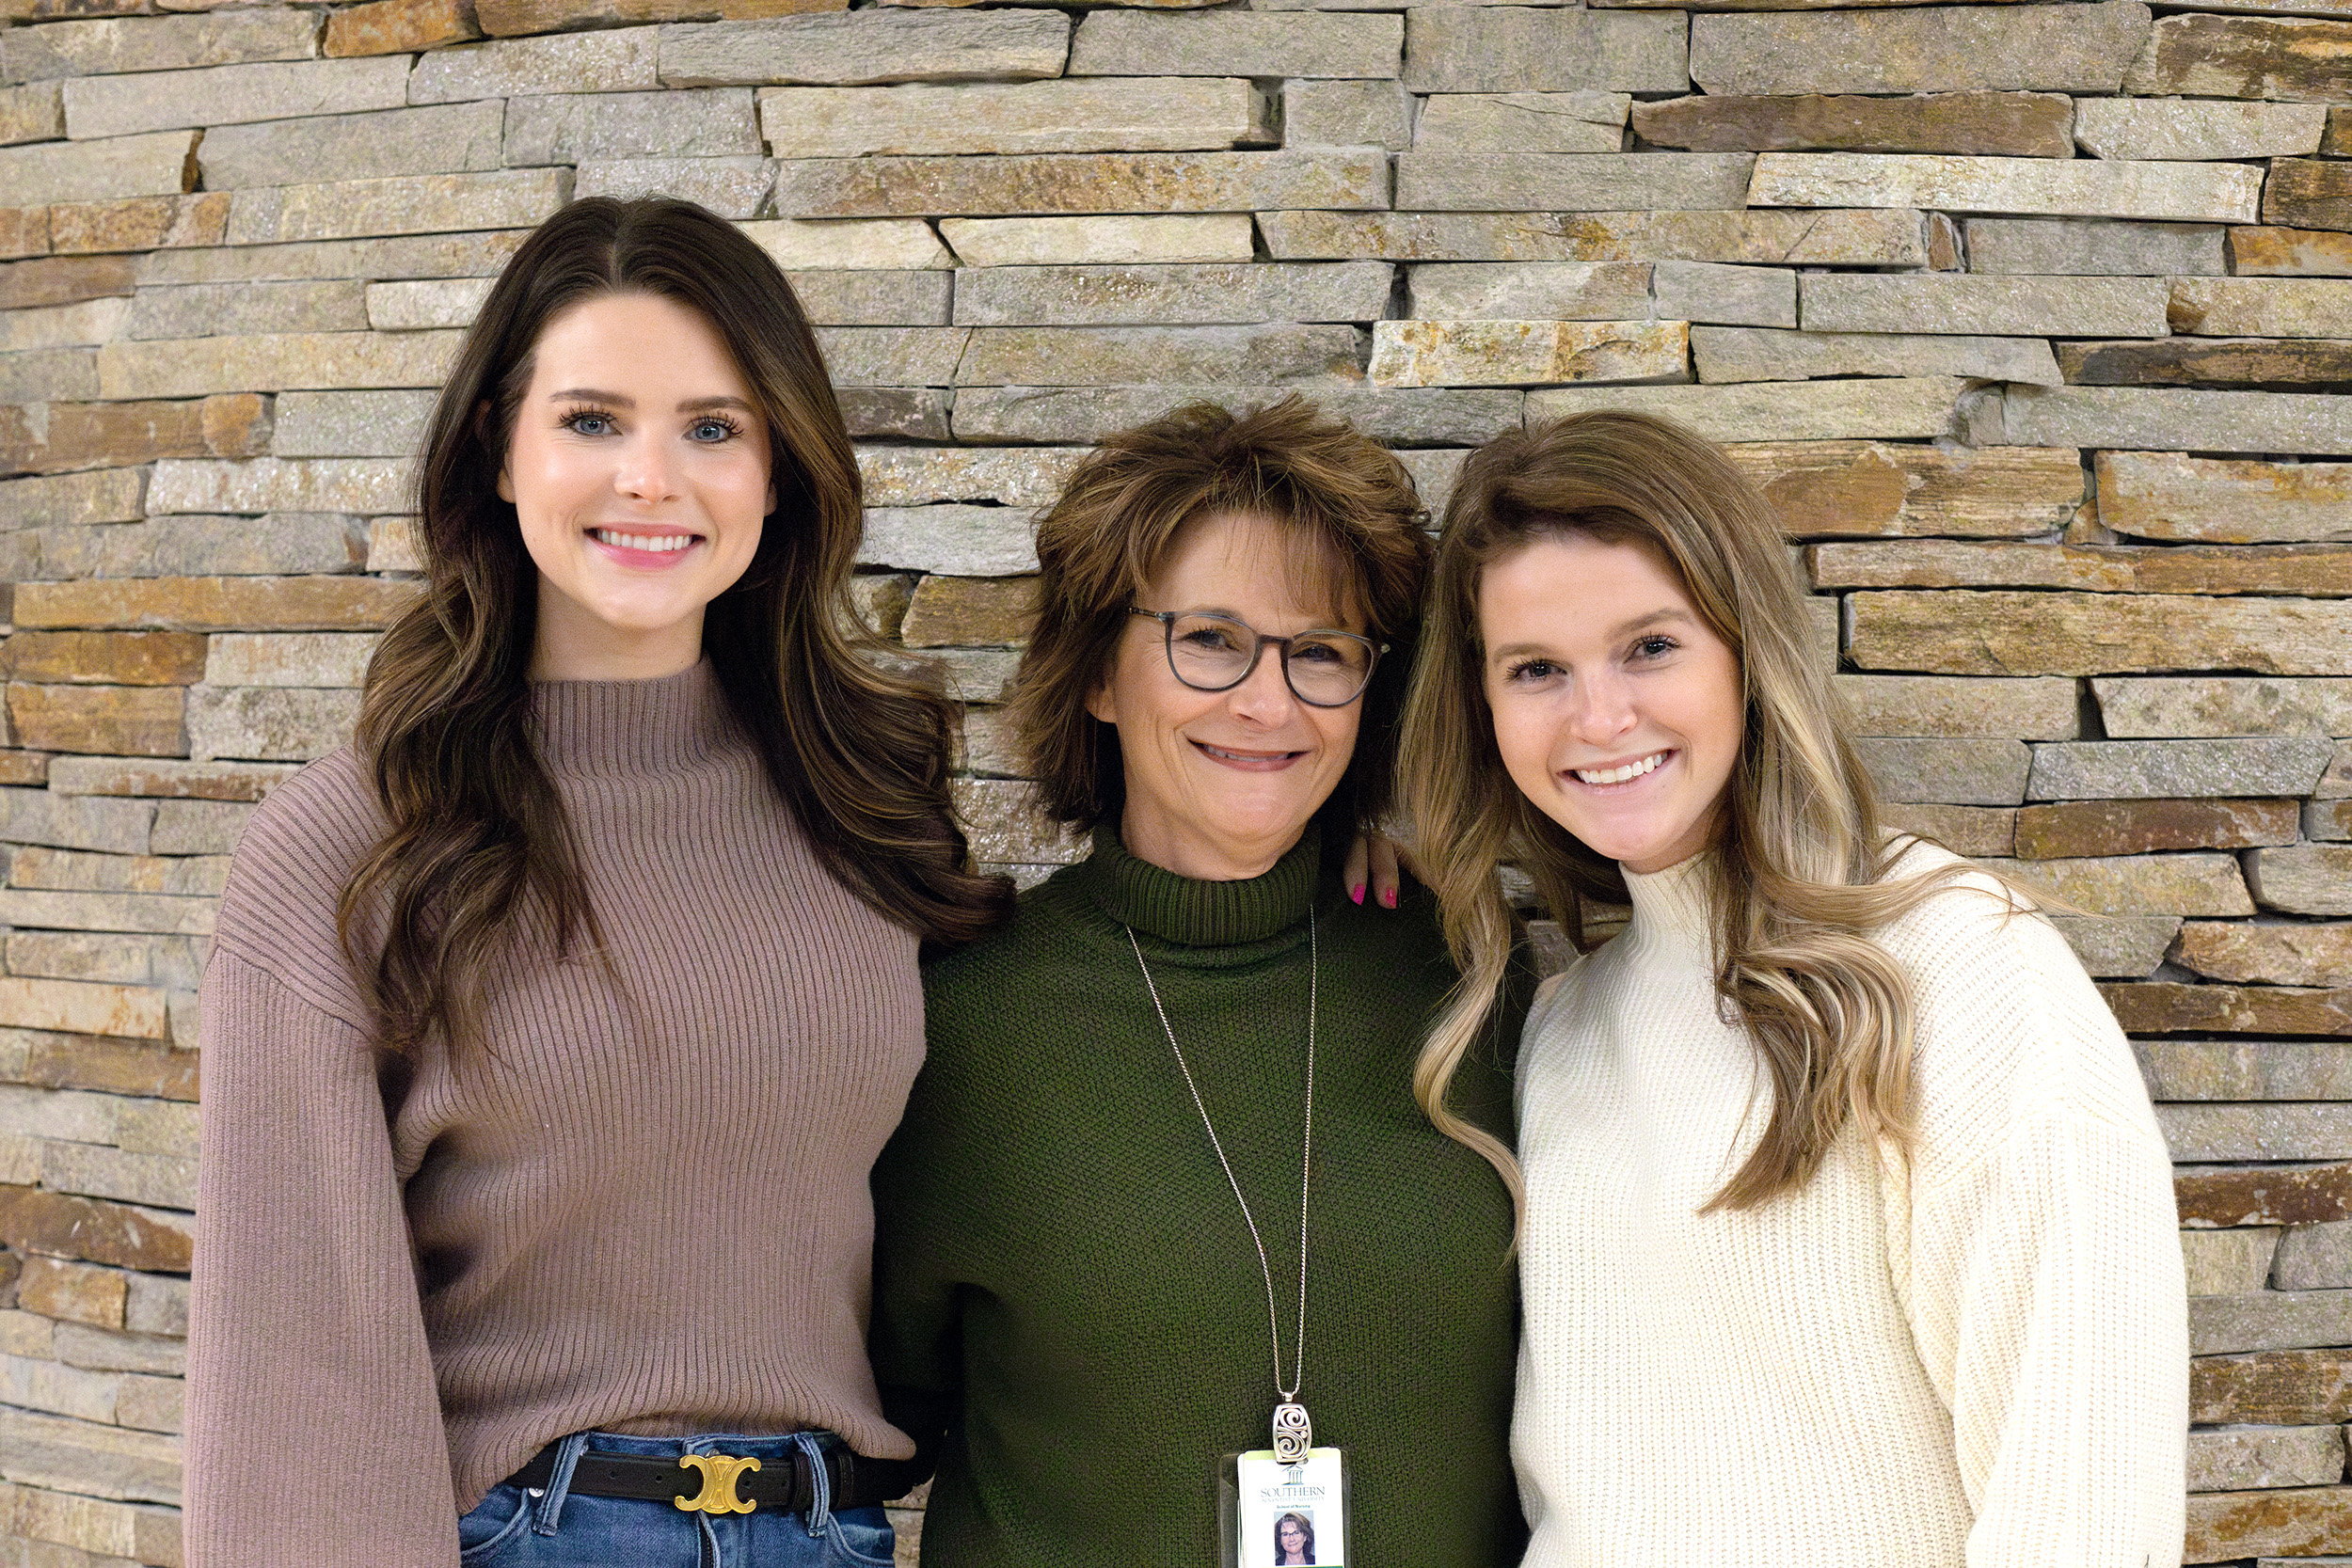 Cindy Johnson (center) with her daughters Jessica Weber (left) and Ashley Finley (right)